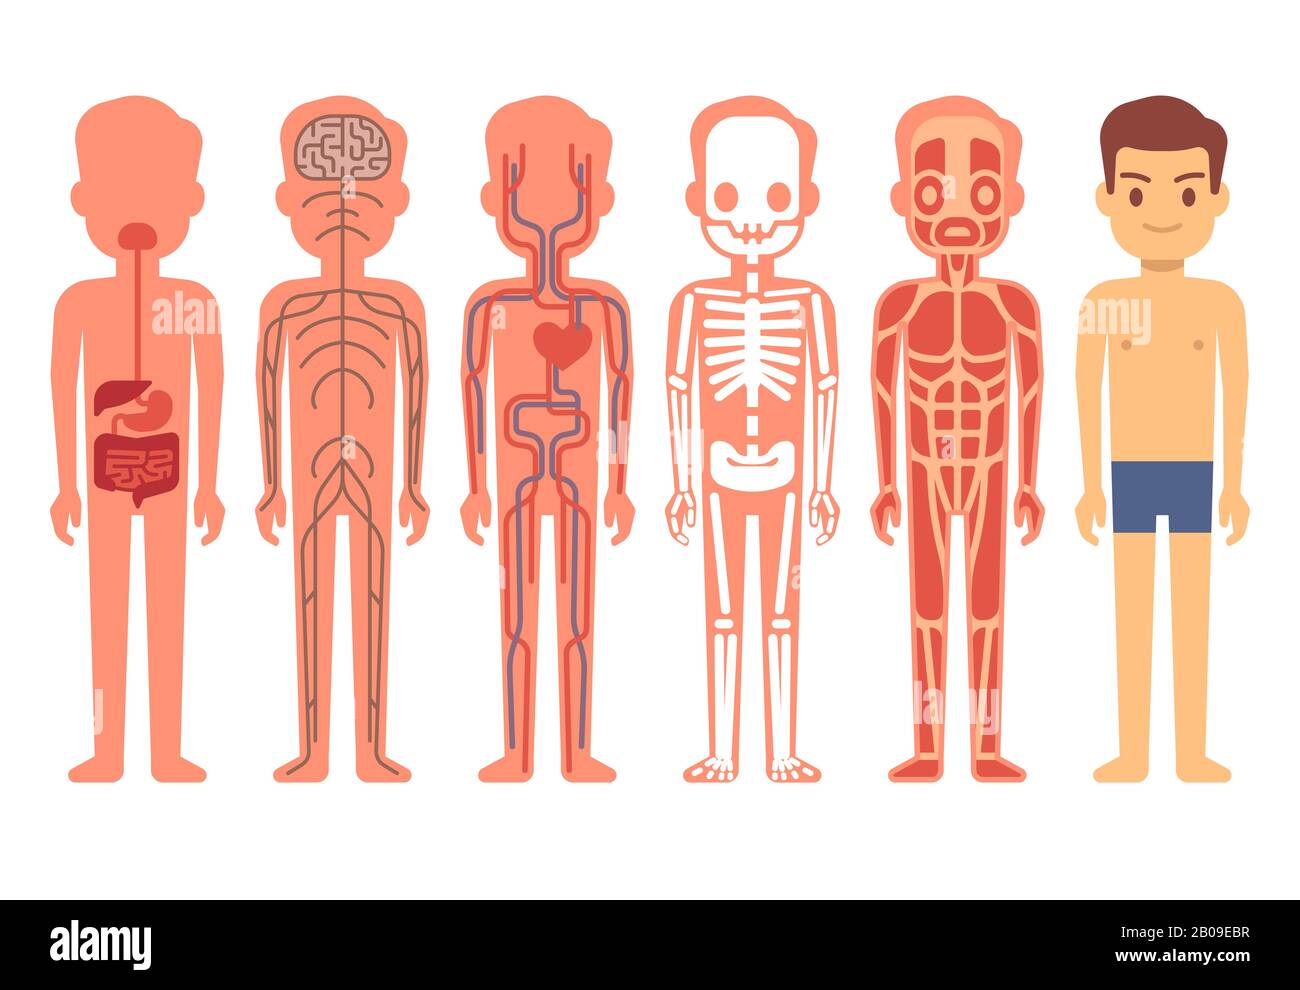 Human body anatomy vector. Male skeleton, muscular, circulatory, nervous and digestive systems. Human functioning system cartoon illustration Stock Vector